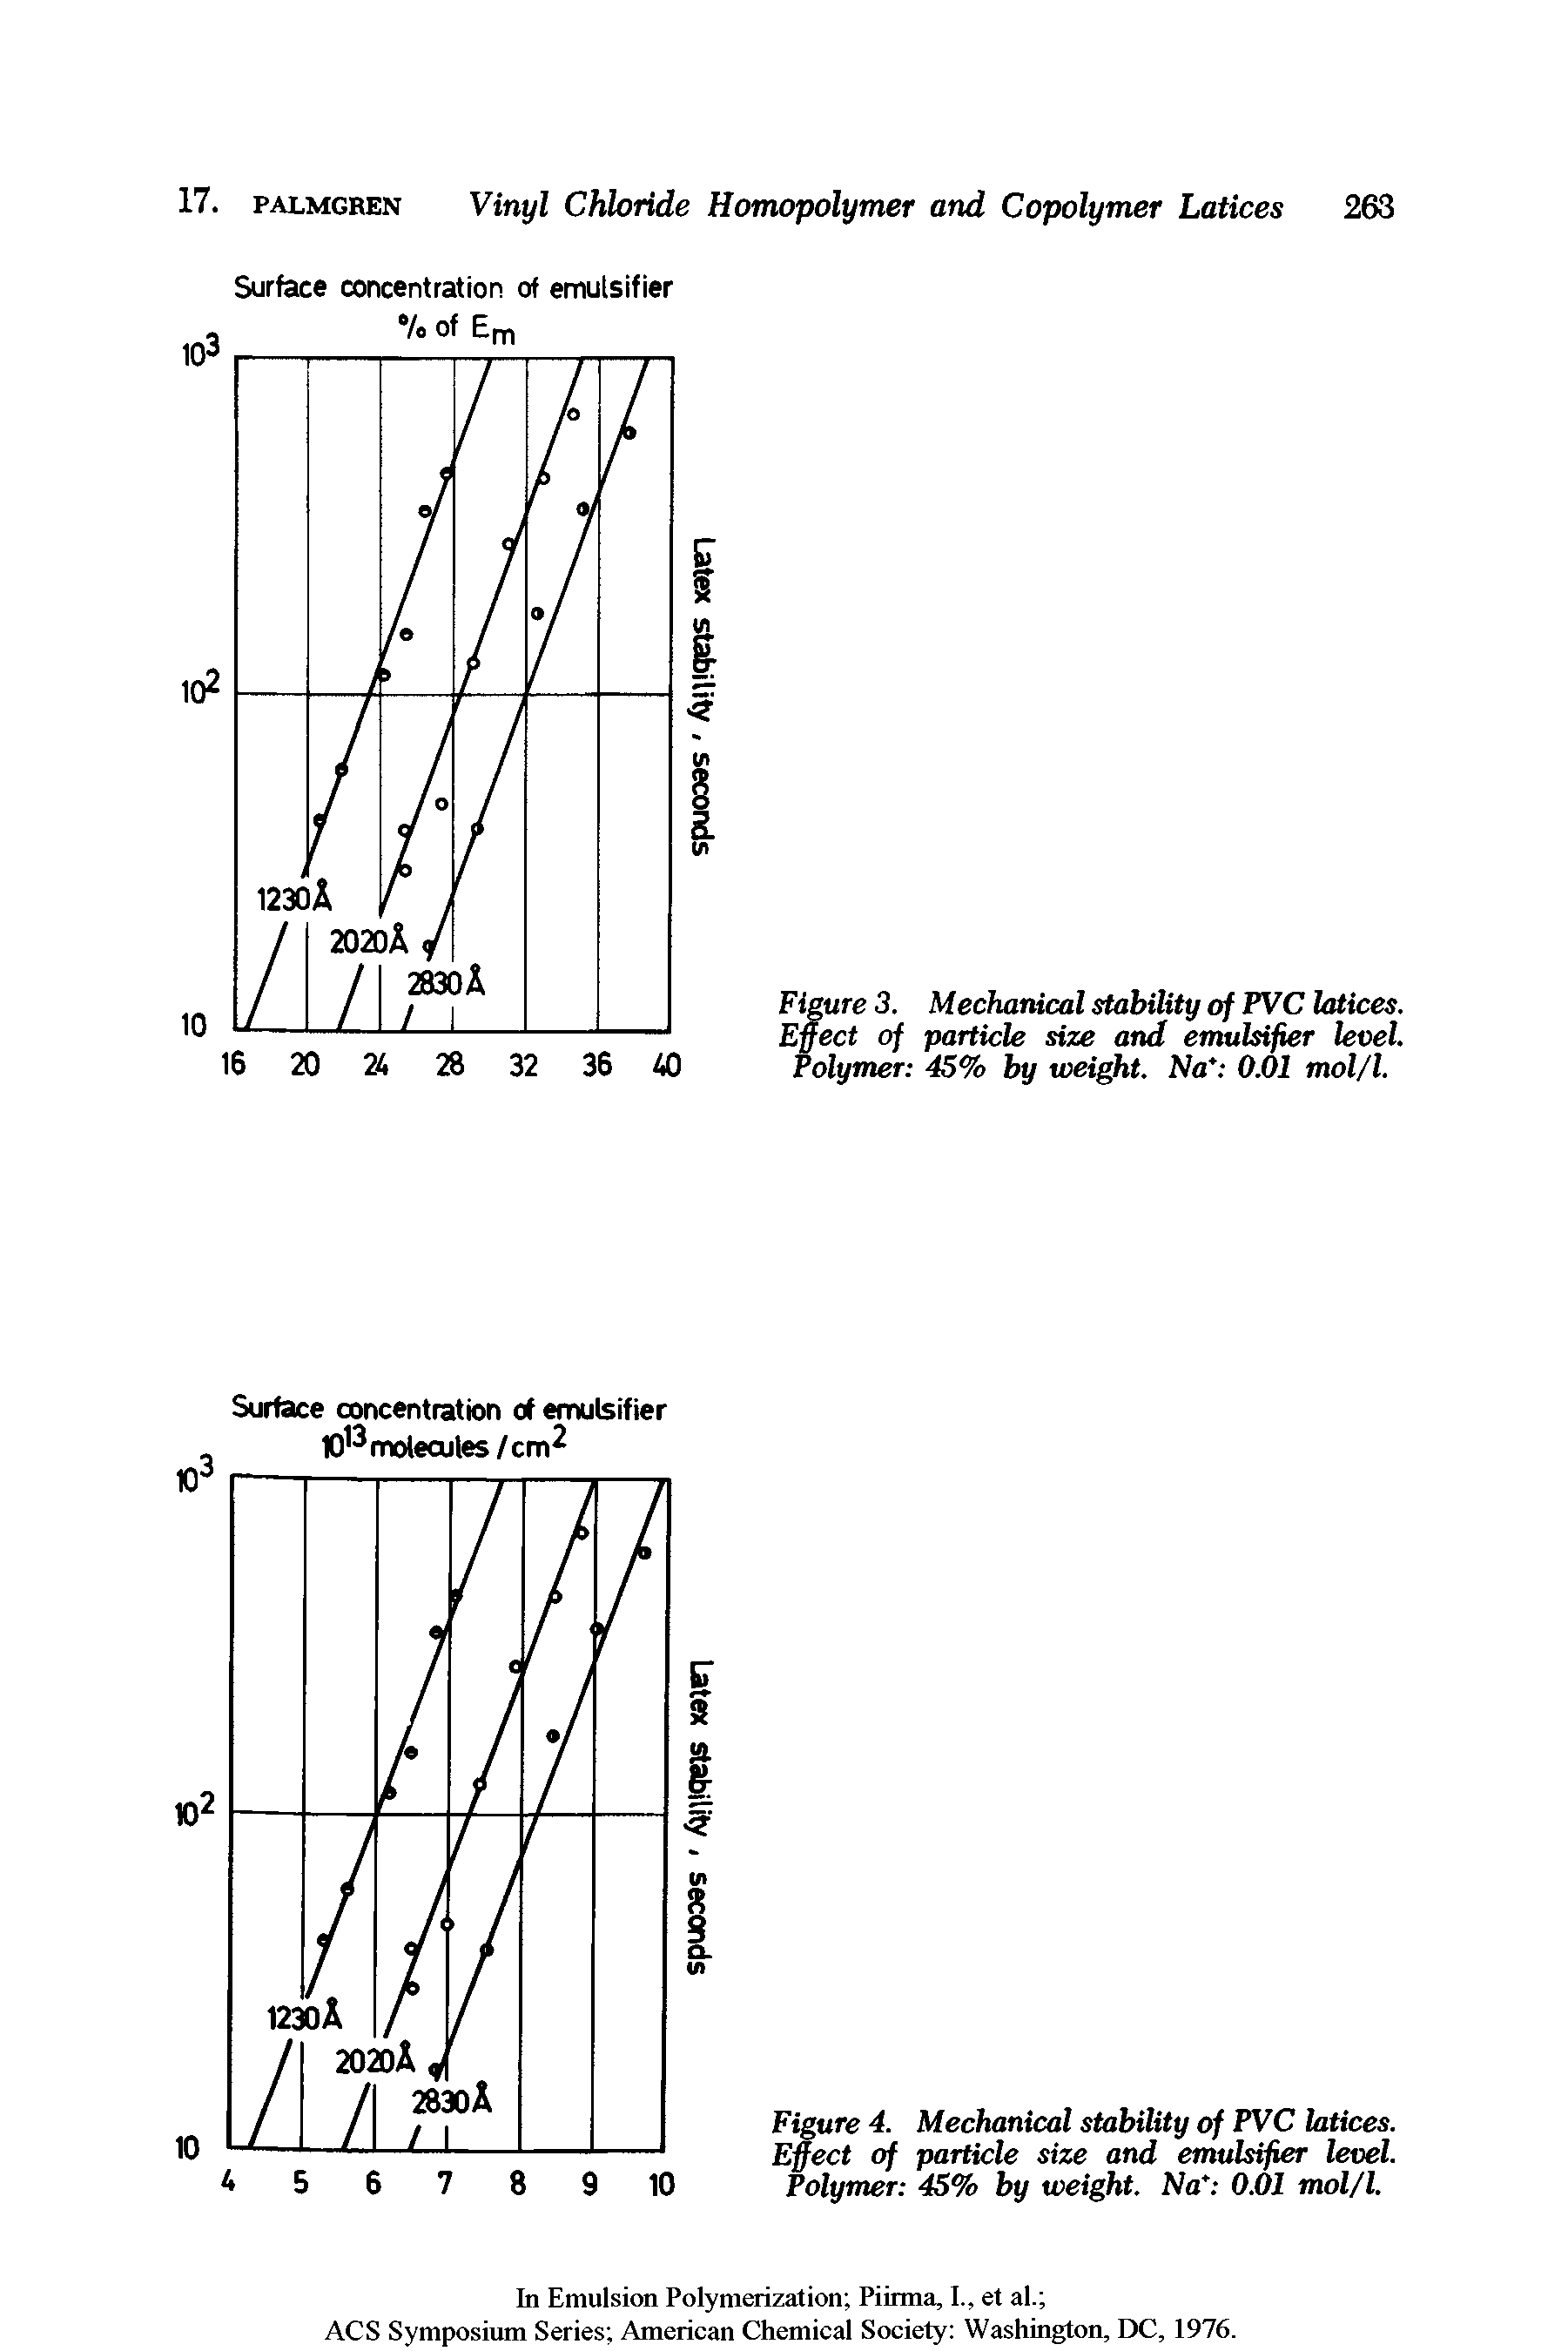 Figure 3. Mechanical stability of PVC latices. Effect of particle size and emulsifier level. Polymer 45% by weight. Na 0.01 mol/l.